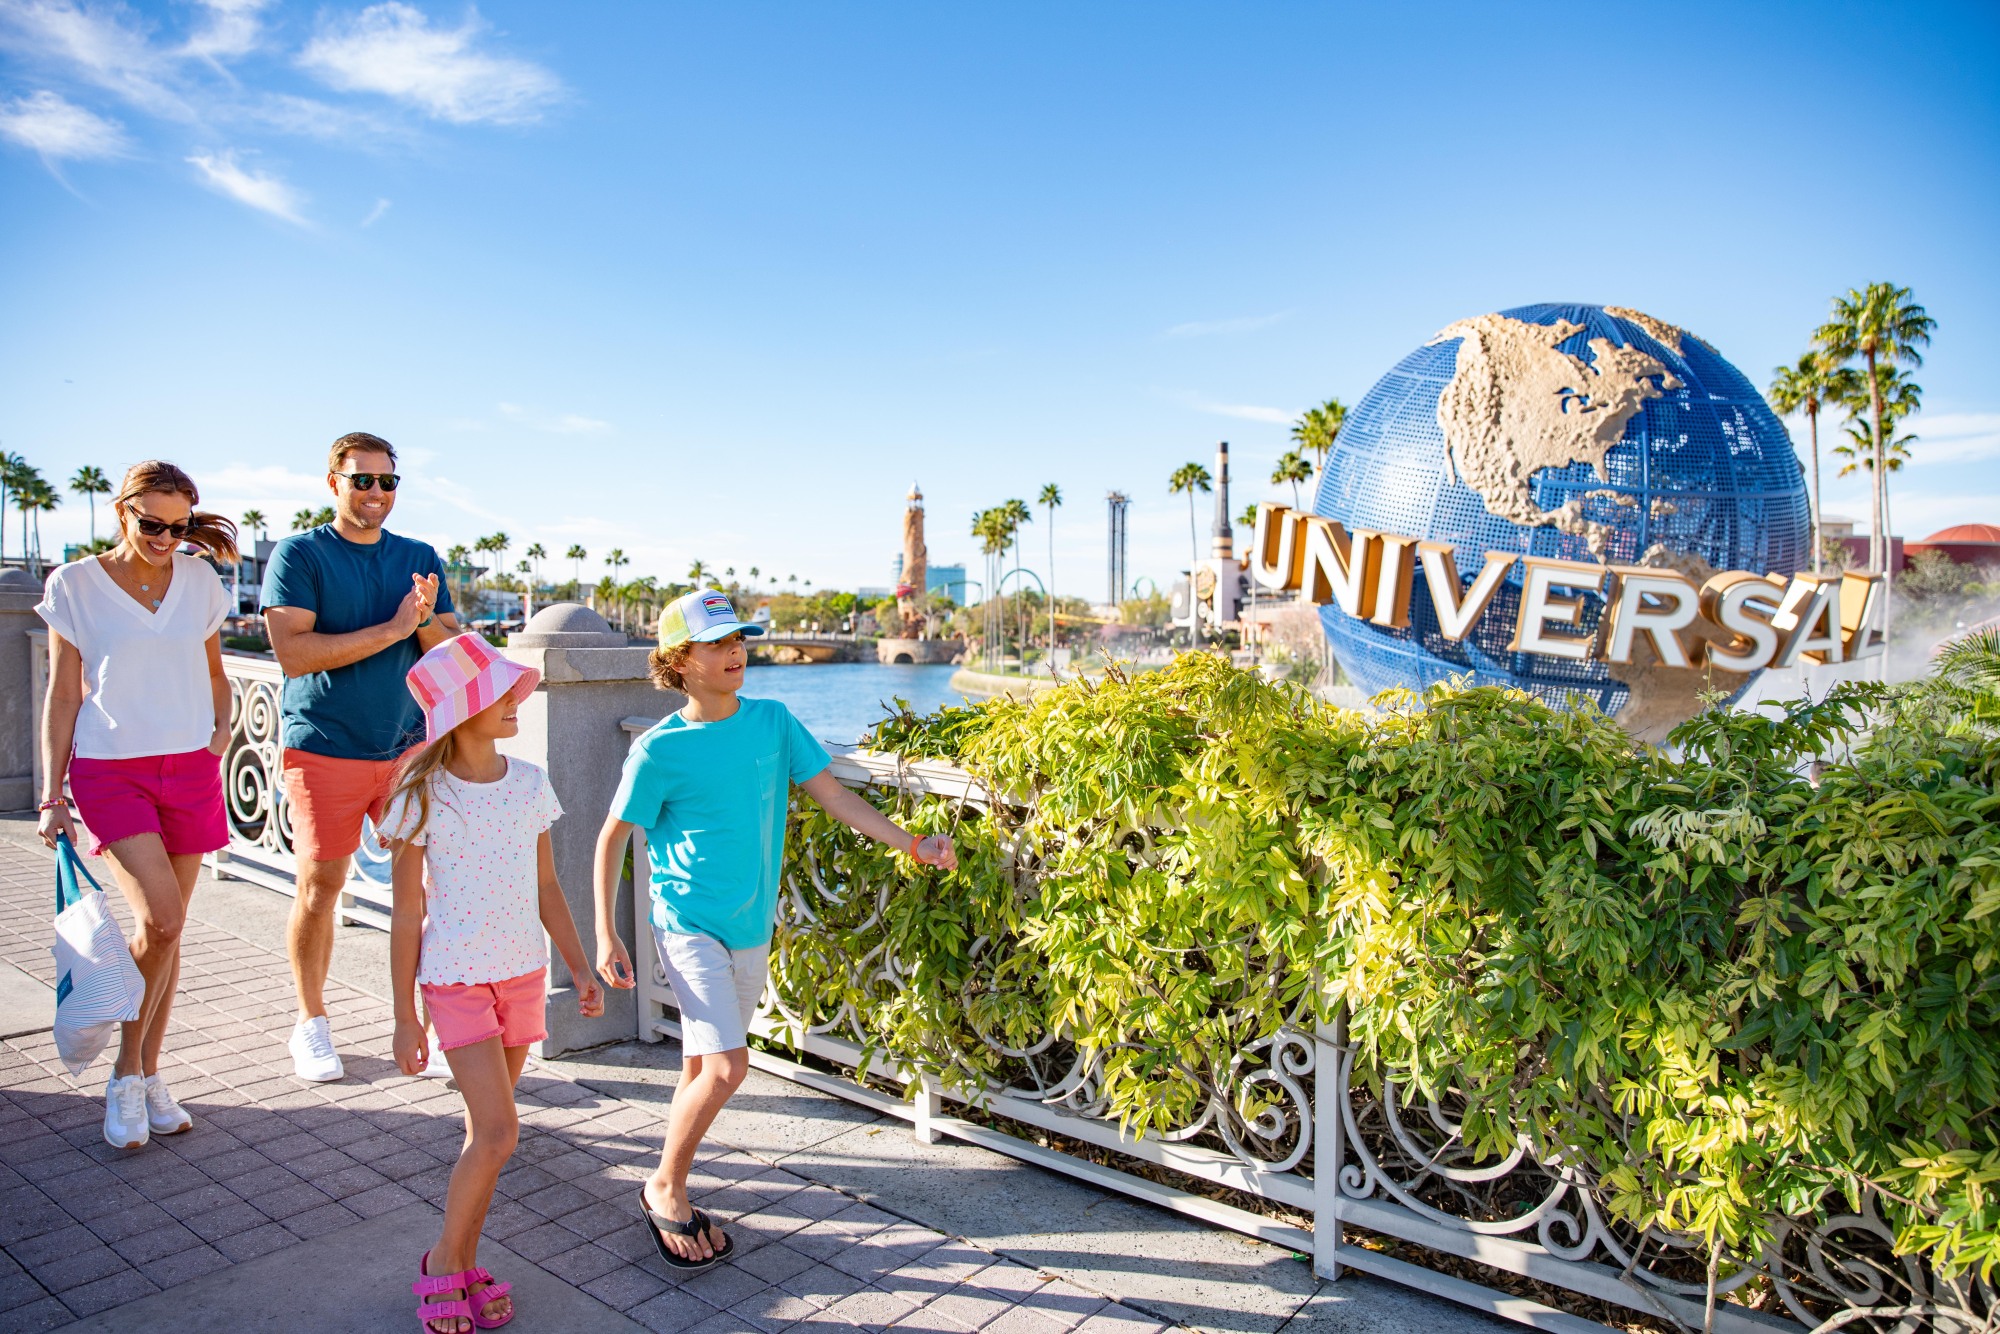 A father and two children exploring Universal Orlando theme park. In the background the Universal globe statue can be seen.